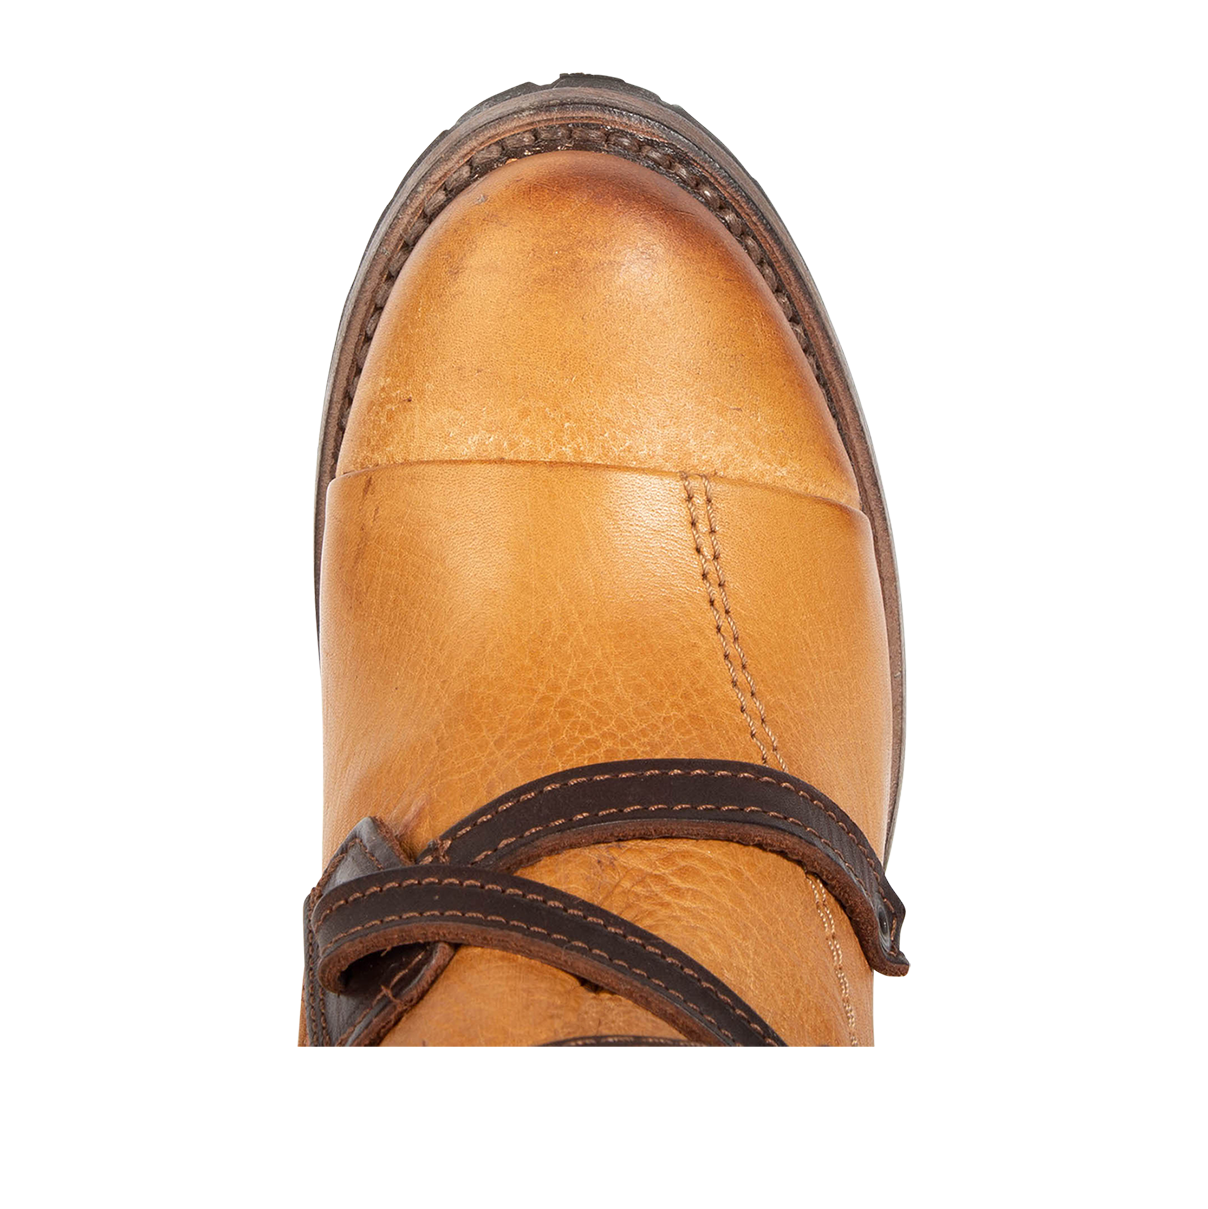 Top view showing round toe and leather ankle strap on FREEBIRD women's Cora tan leather boot